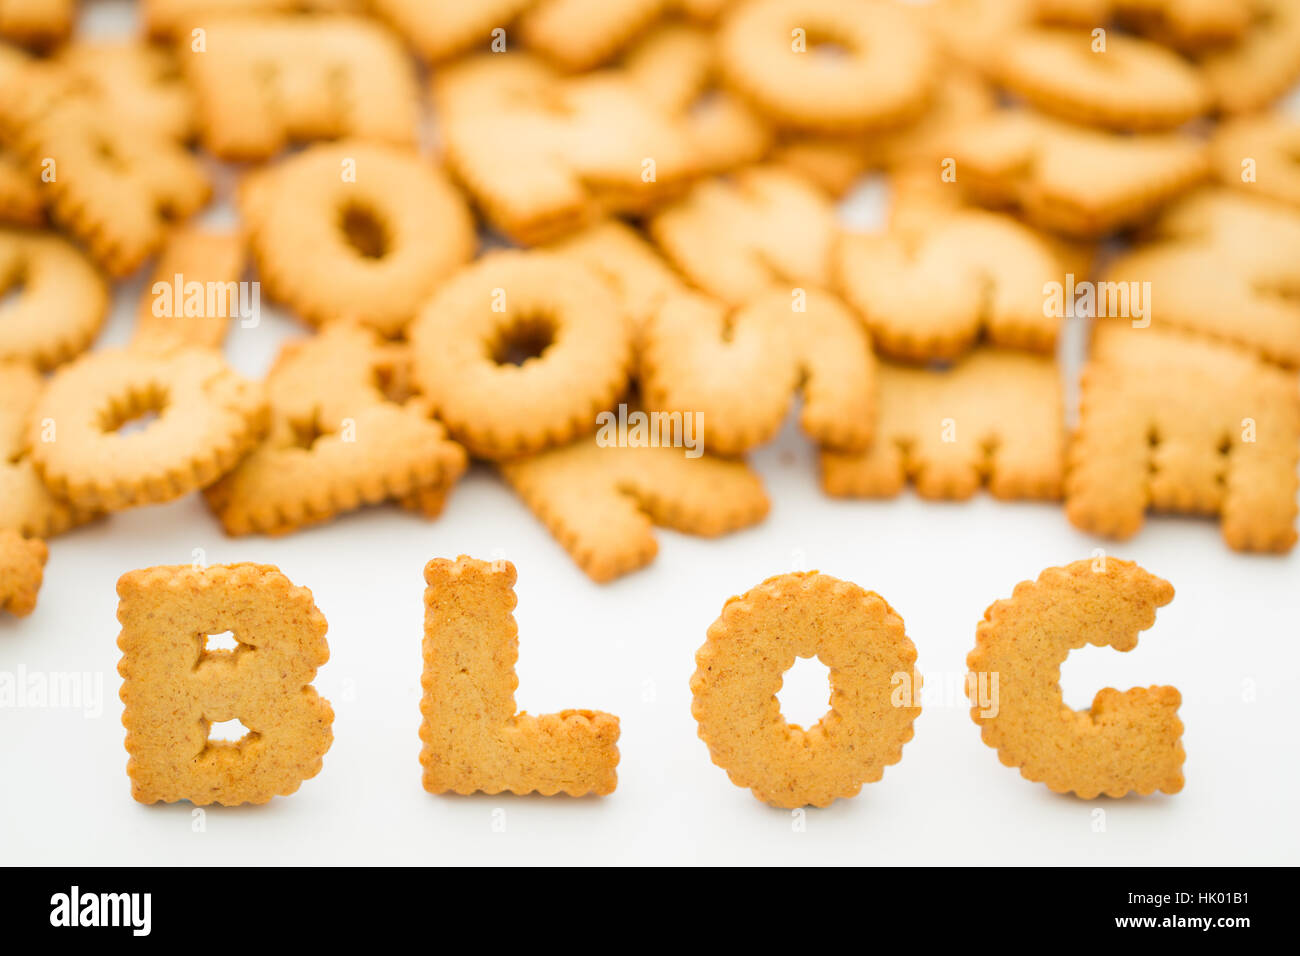 The word blog created from alphabet shaped cookies and biscuits on a white background for a food blogger. Stock Photo